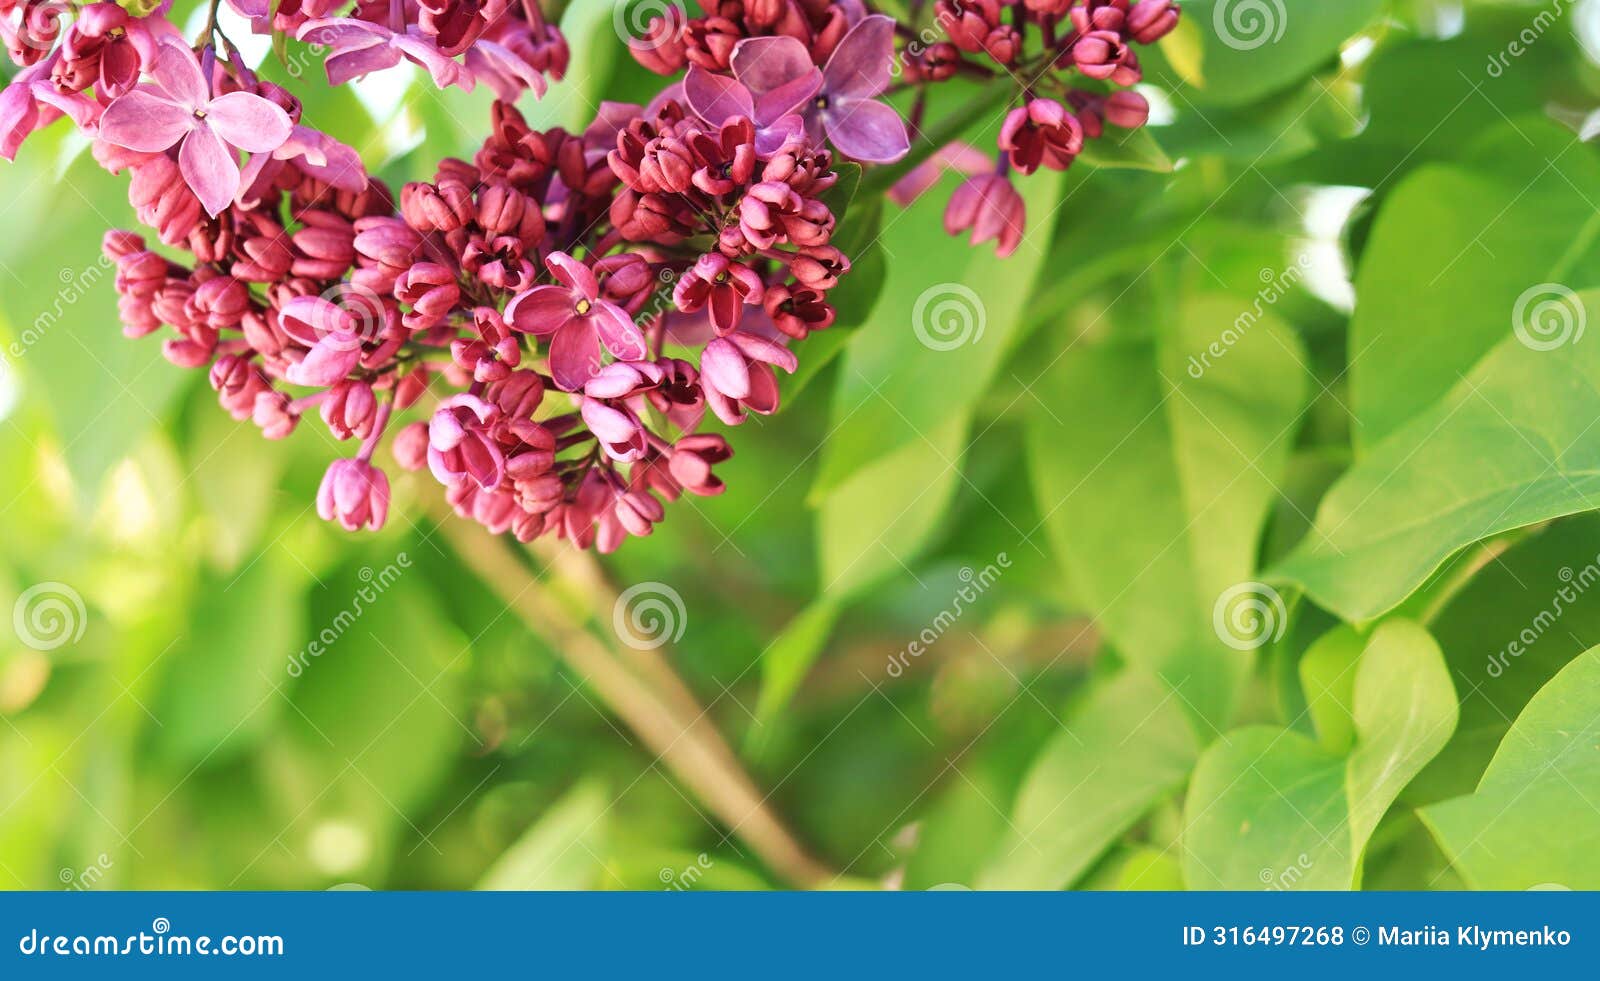 lilac blossom on a sunny day in the park. pink flowers, large inflorescences